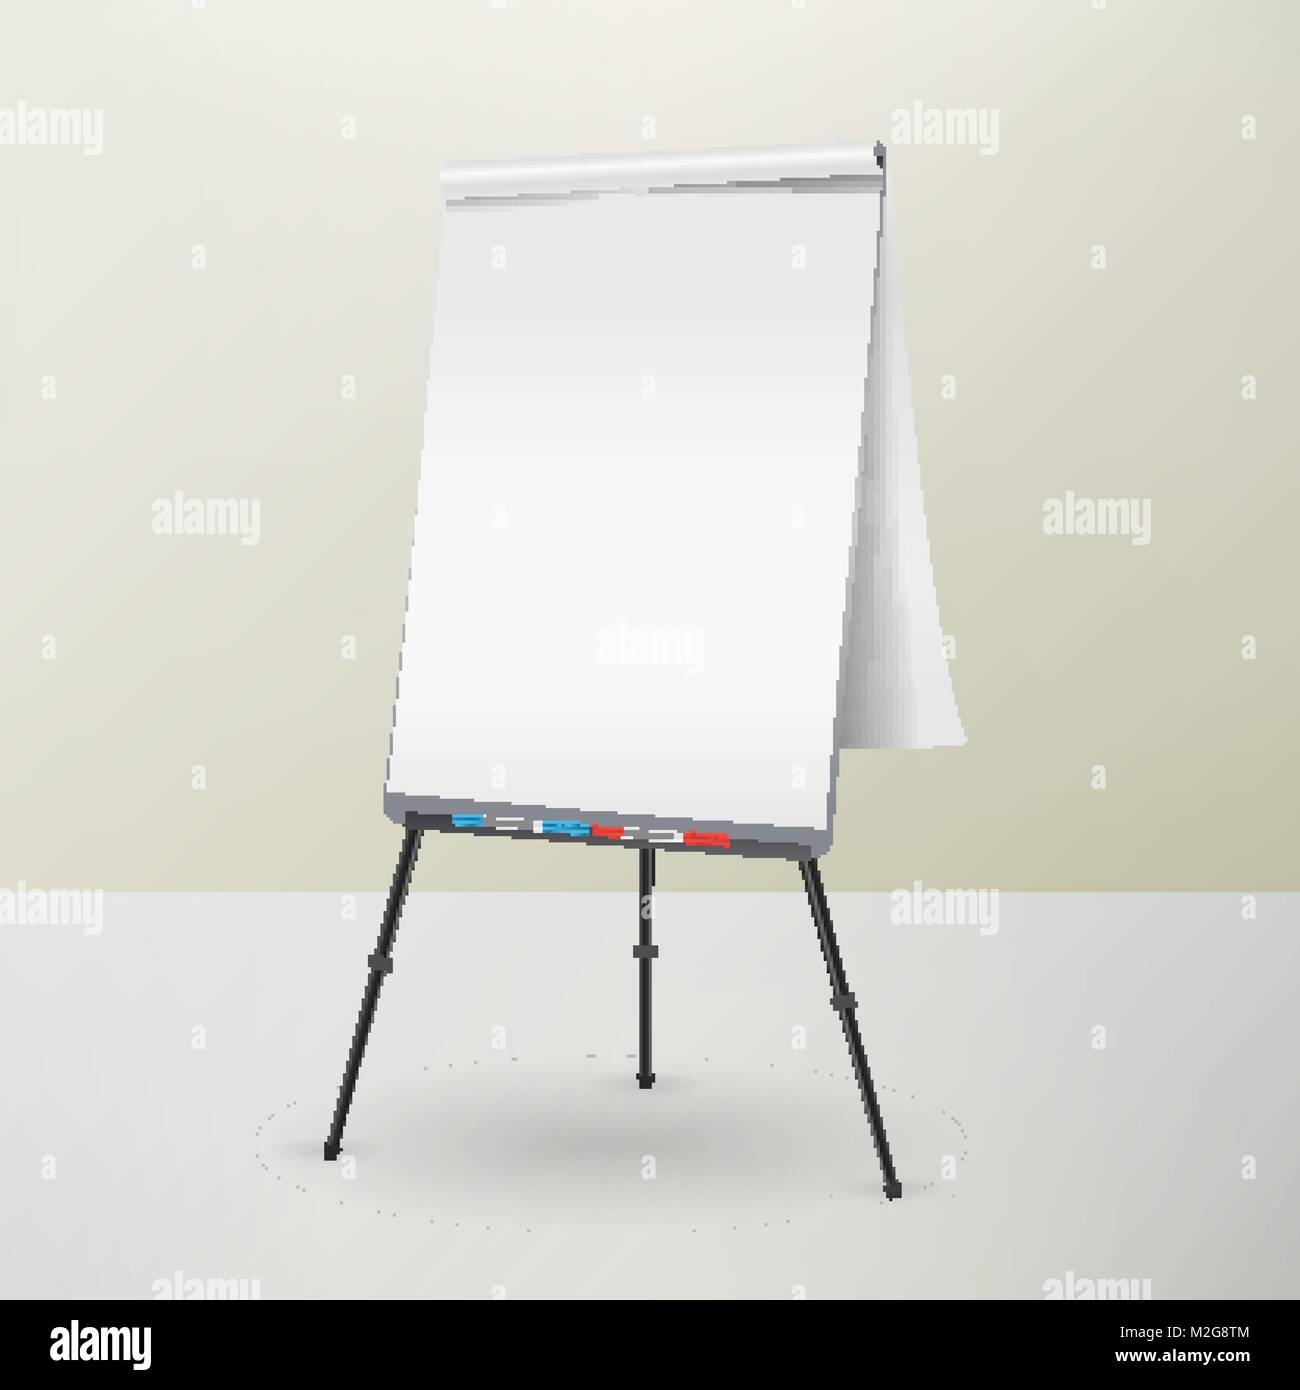 Flip Chart Isolated Vector Blank Sheet Of Paper On A Tripod Isolated  Illustration Stock Illustration - Download Image Now - iStock